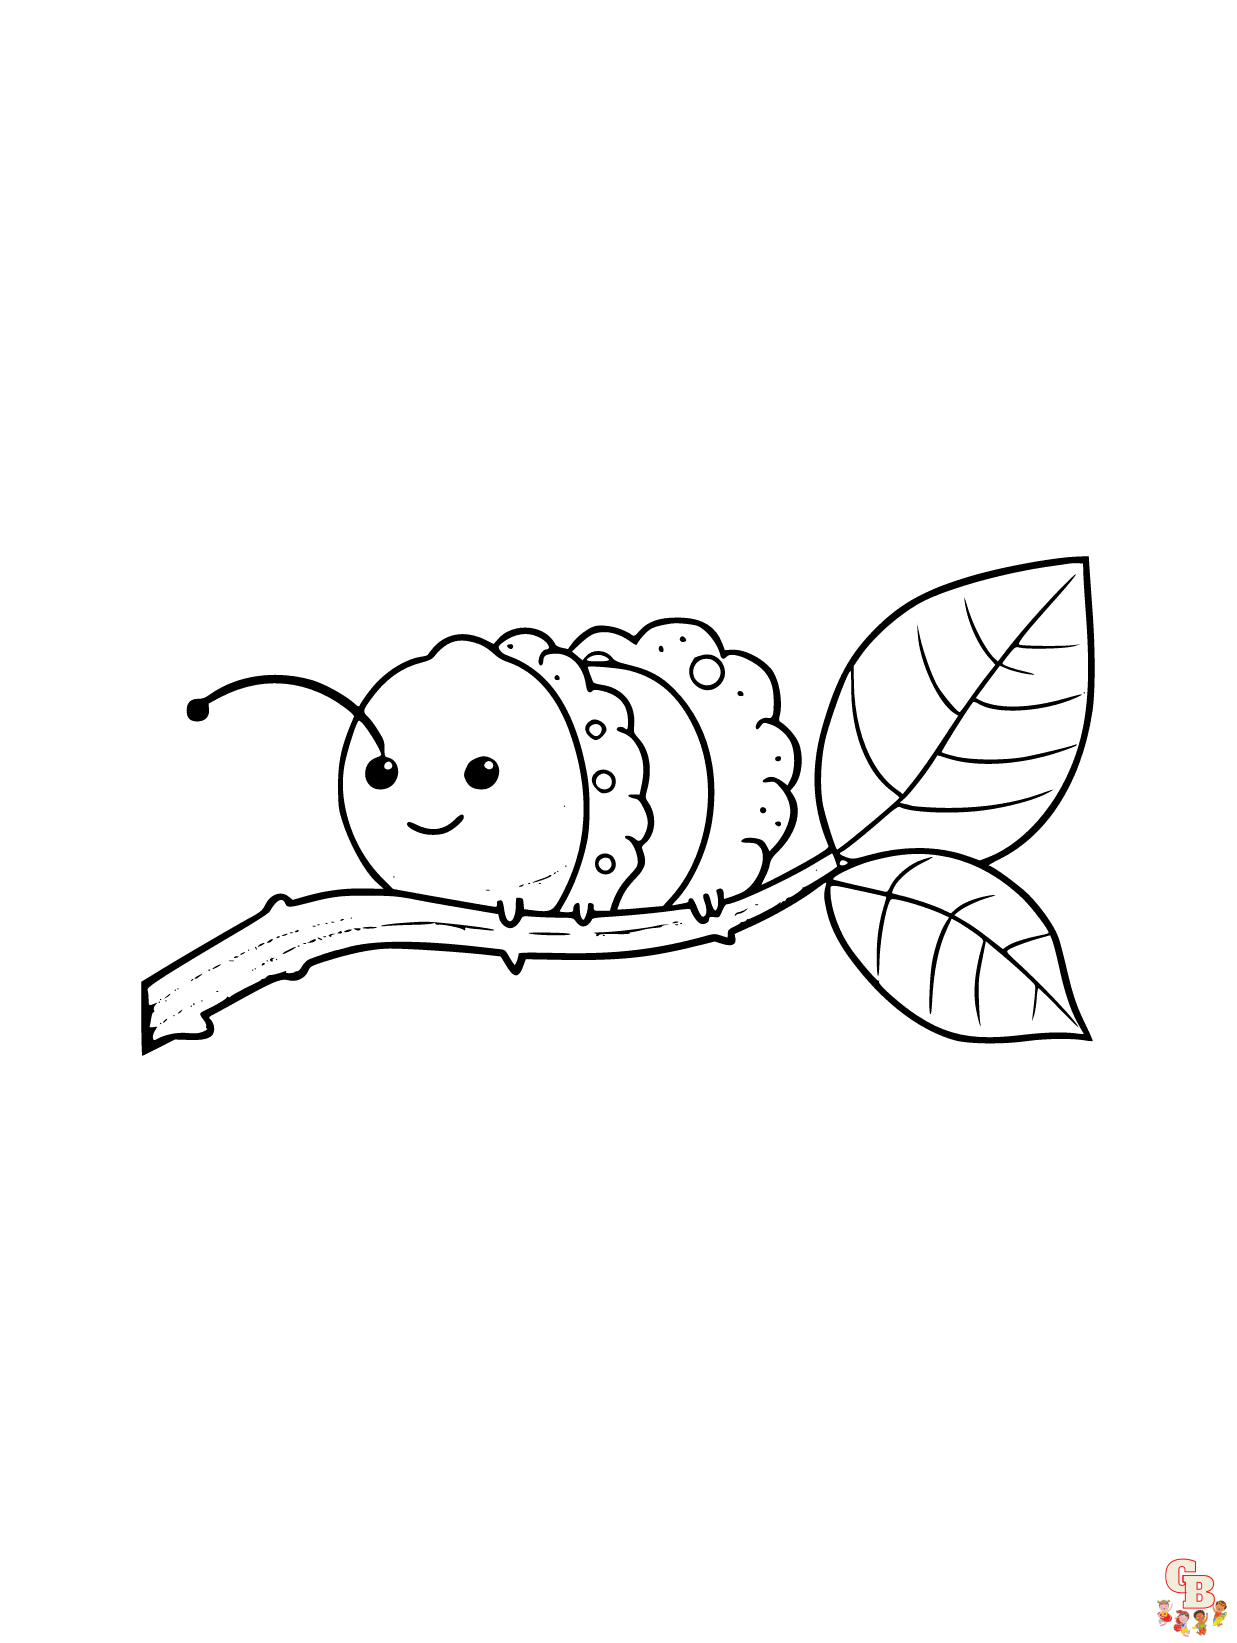 Caterpillar coloring pages easy